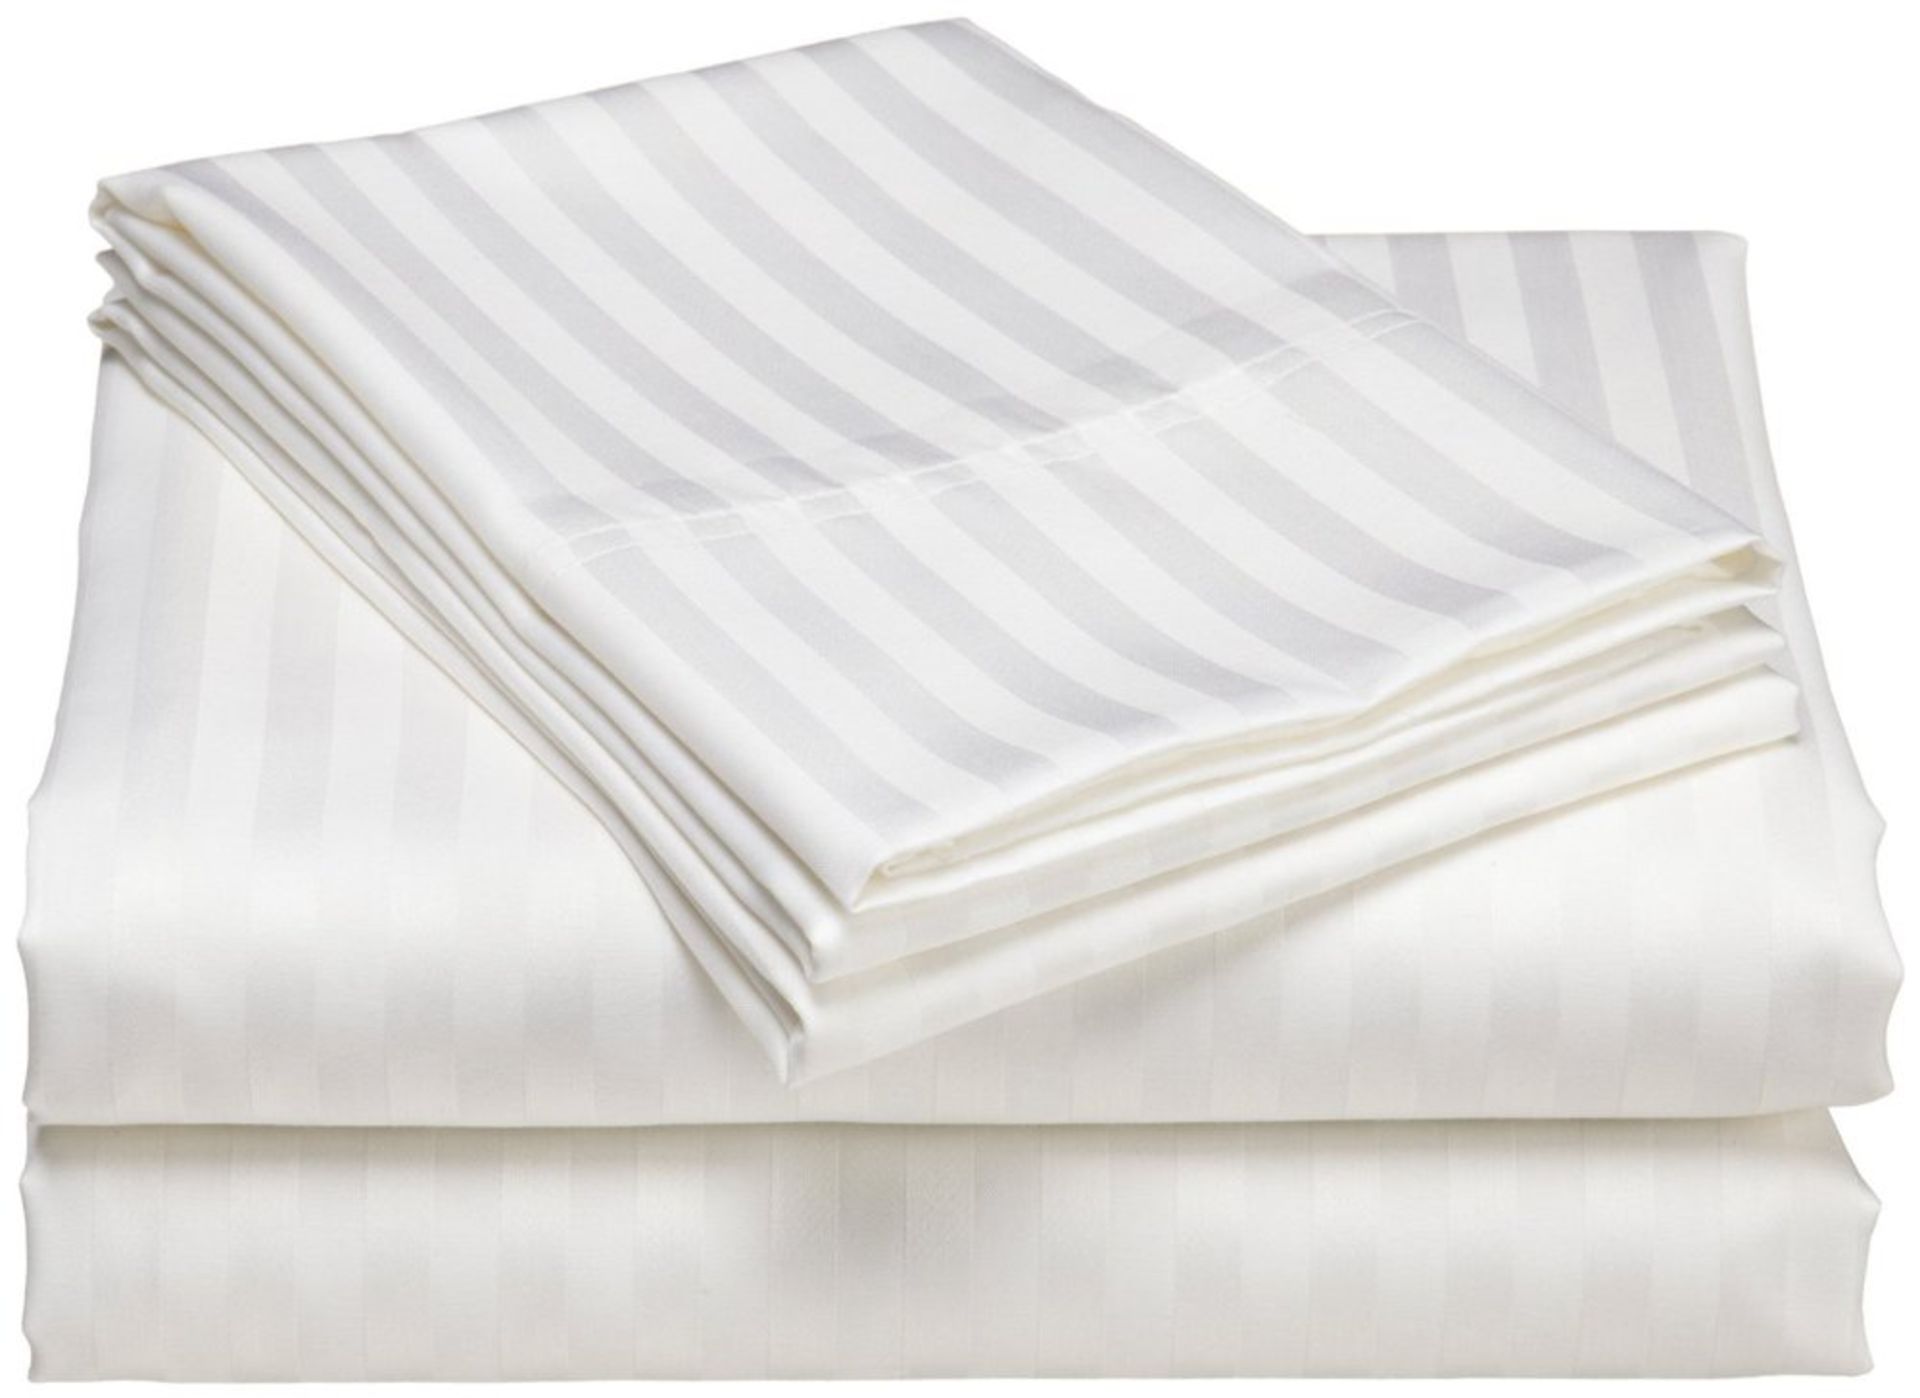 V Brand New 100% Egyptian Cotton Striped Fitted Sheet King Size RRP £29.50 X 5 Bid price to be